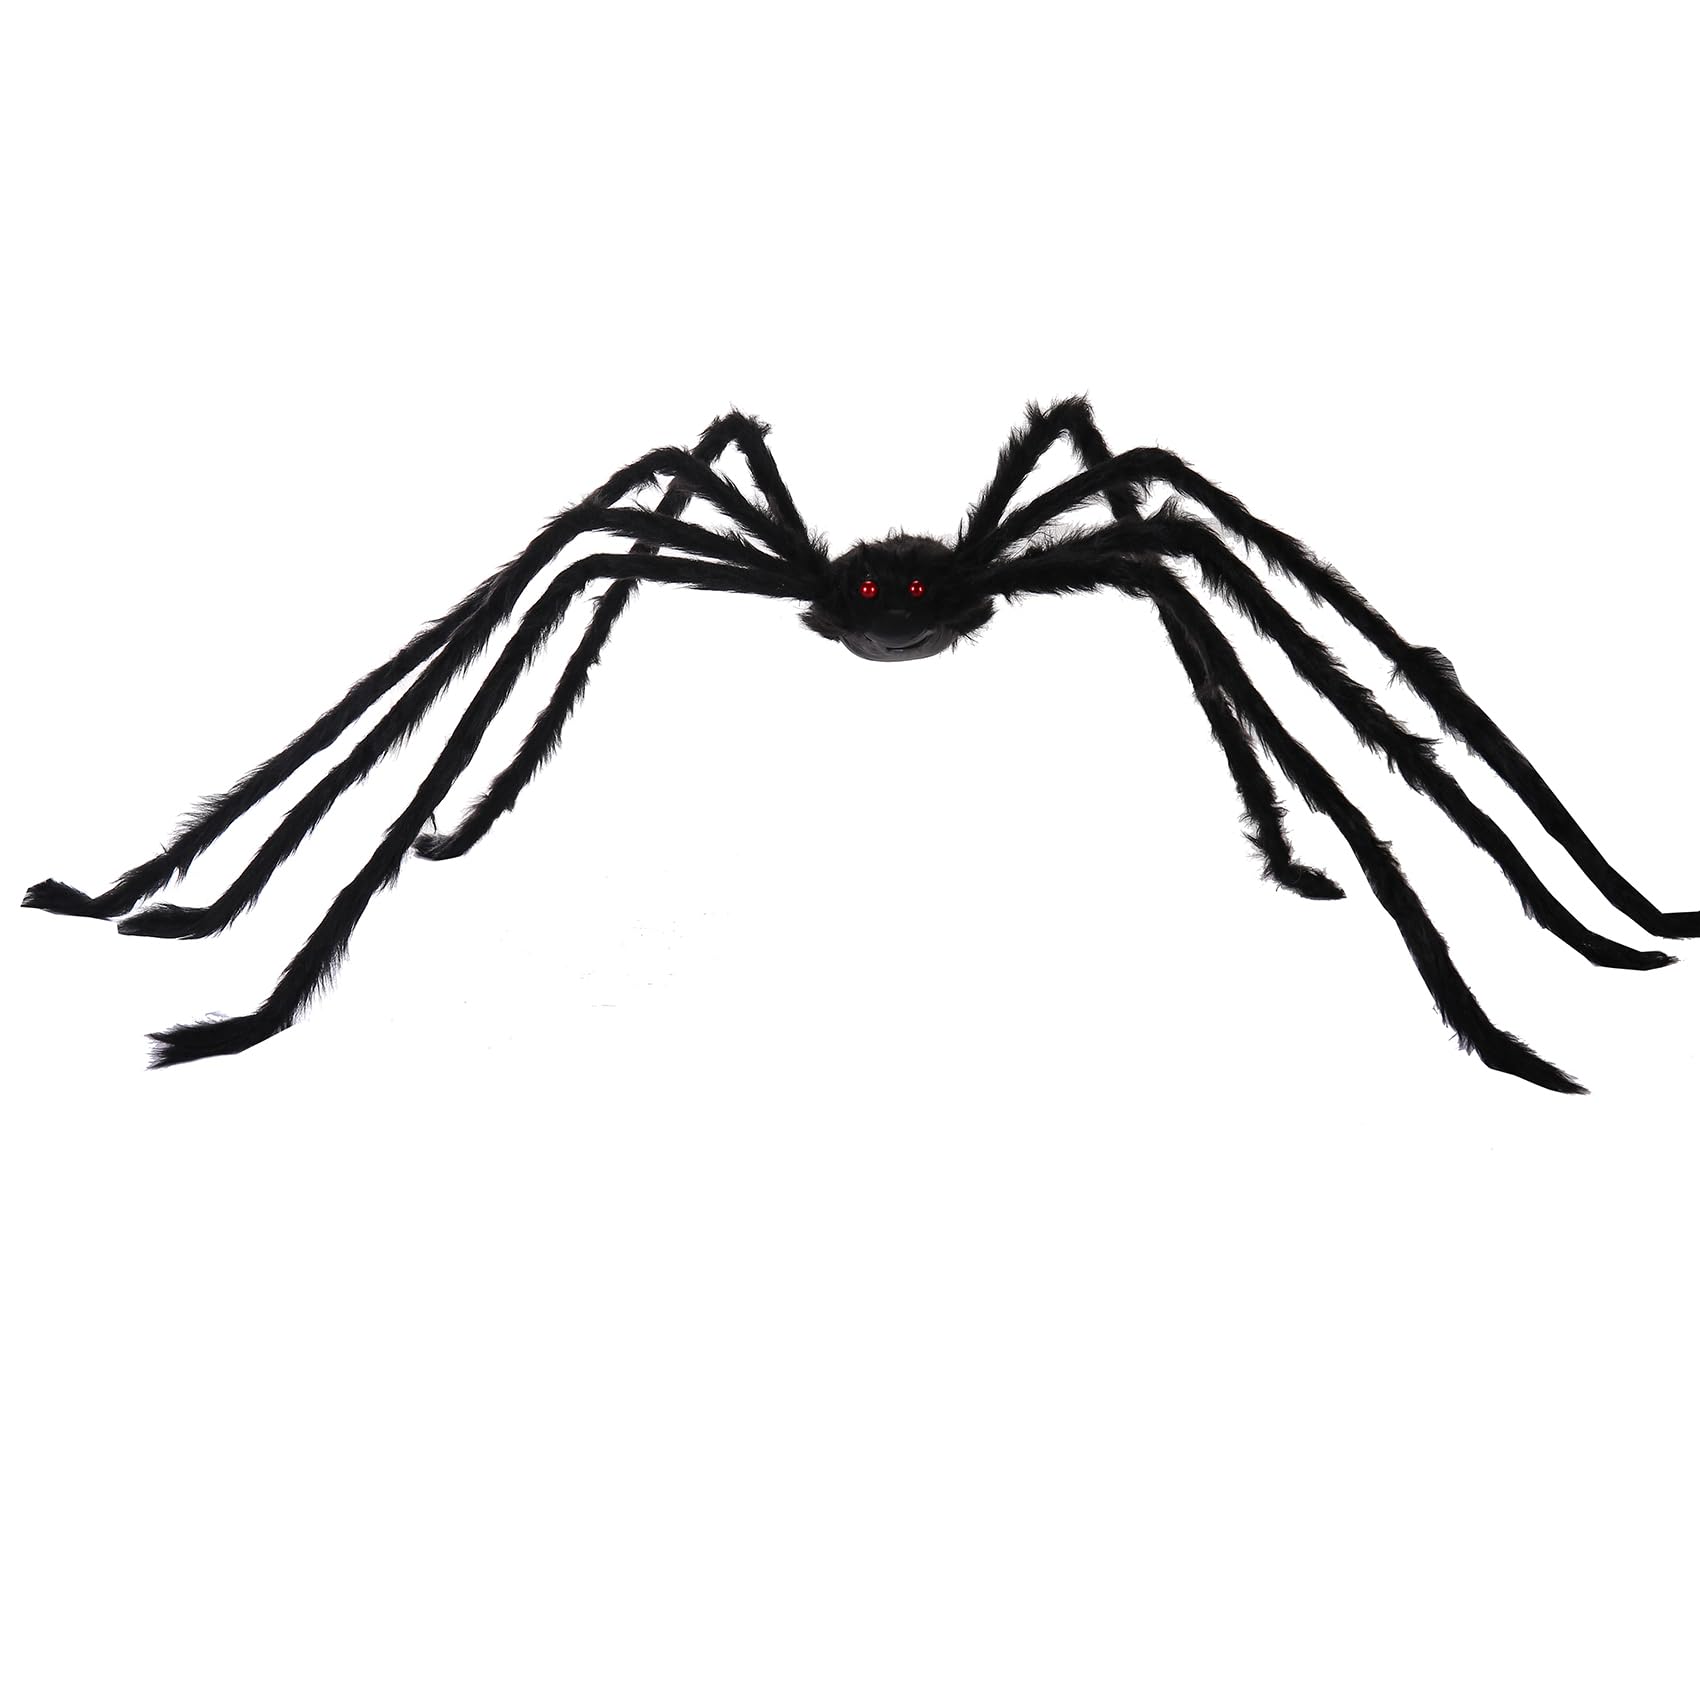 6.6ft Giant Spider for Halloween Decorations Large Black Grey Hairy Spider for Scary Indoor Outdoor Yard Garden Porch Outside Haunted House Decor